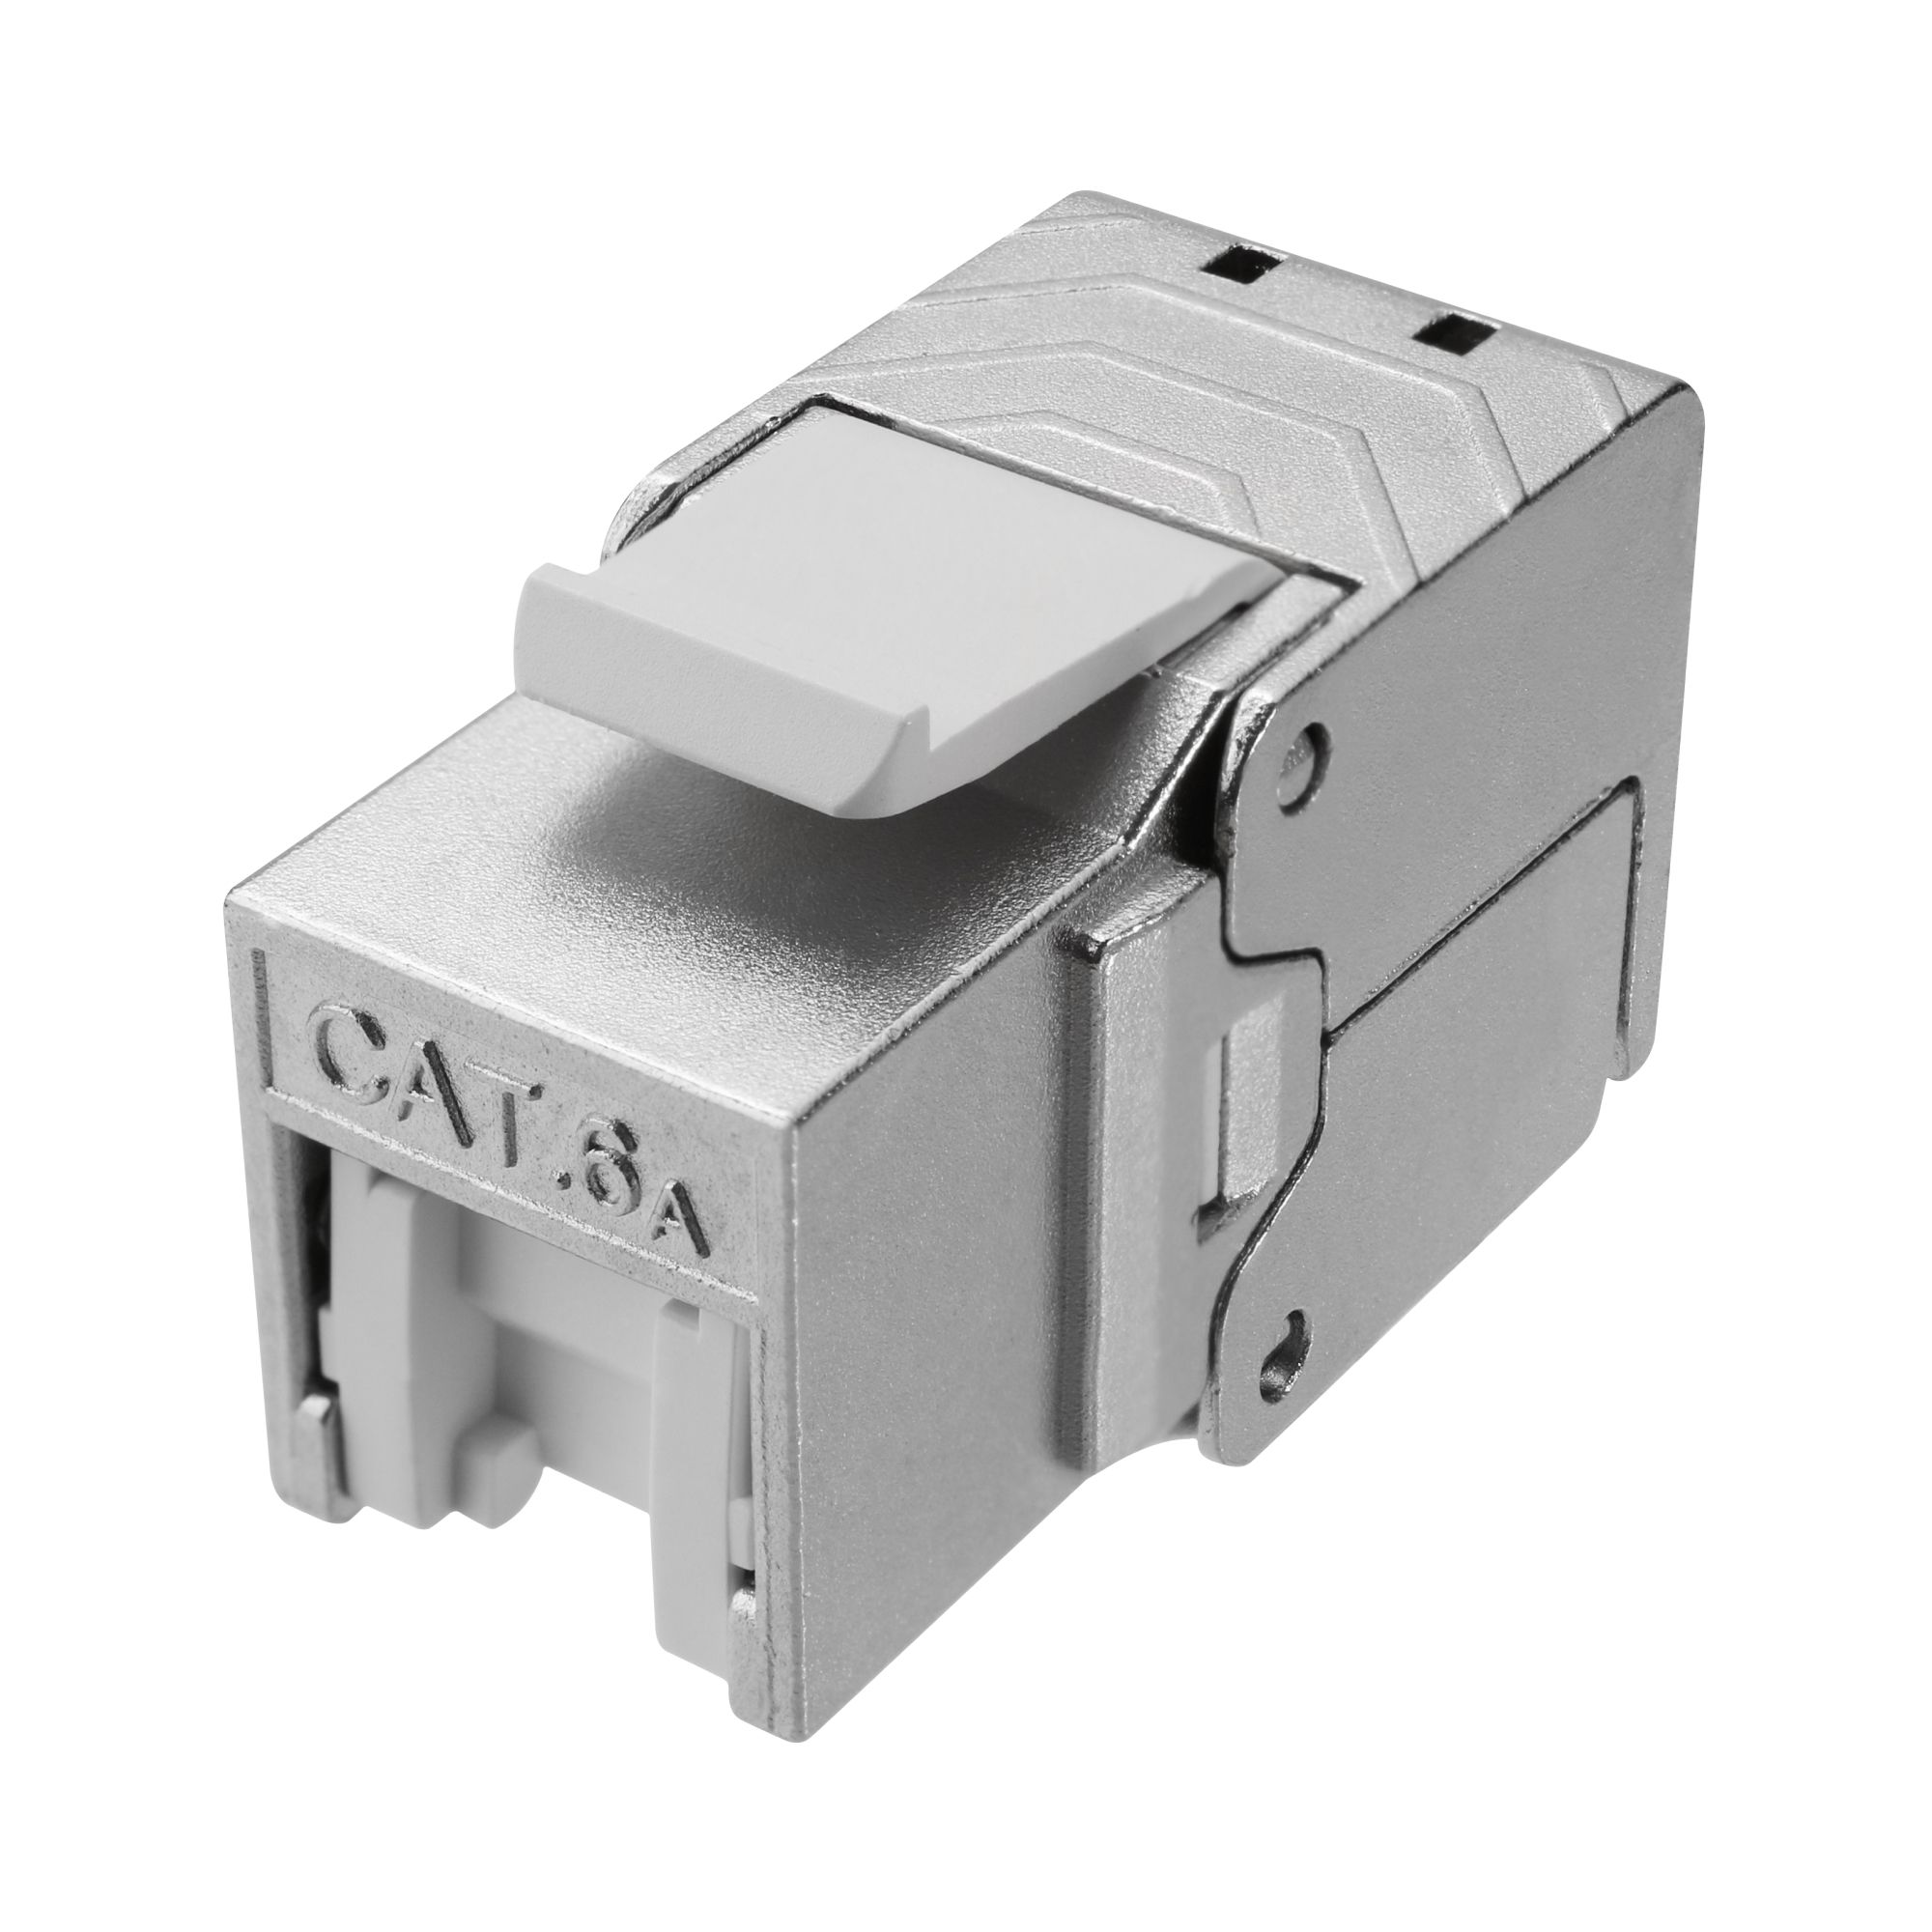 CAT7 Flat Stranded Shielded RJ45 Plug for 32 AWG Cable